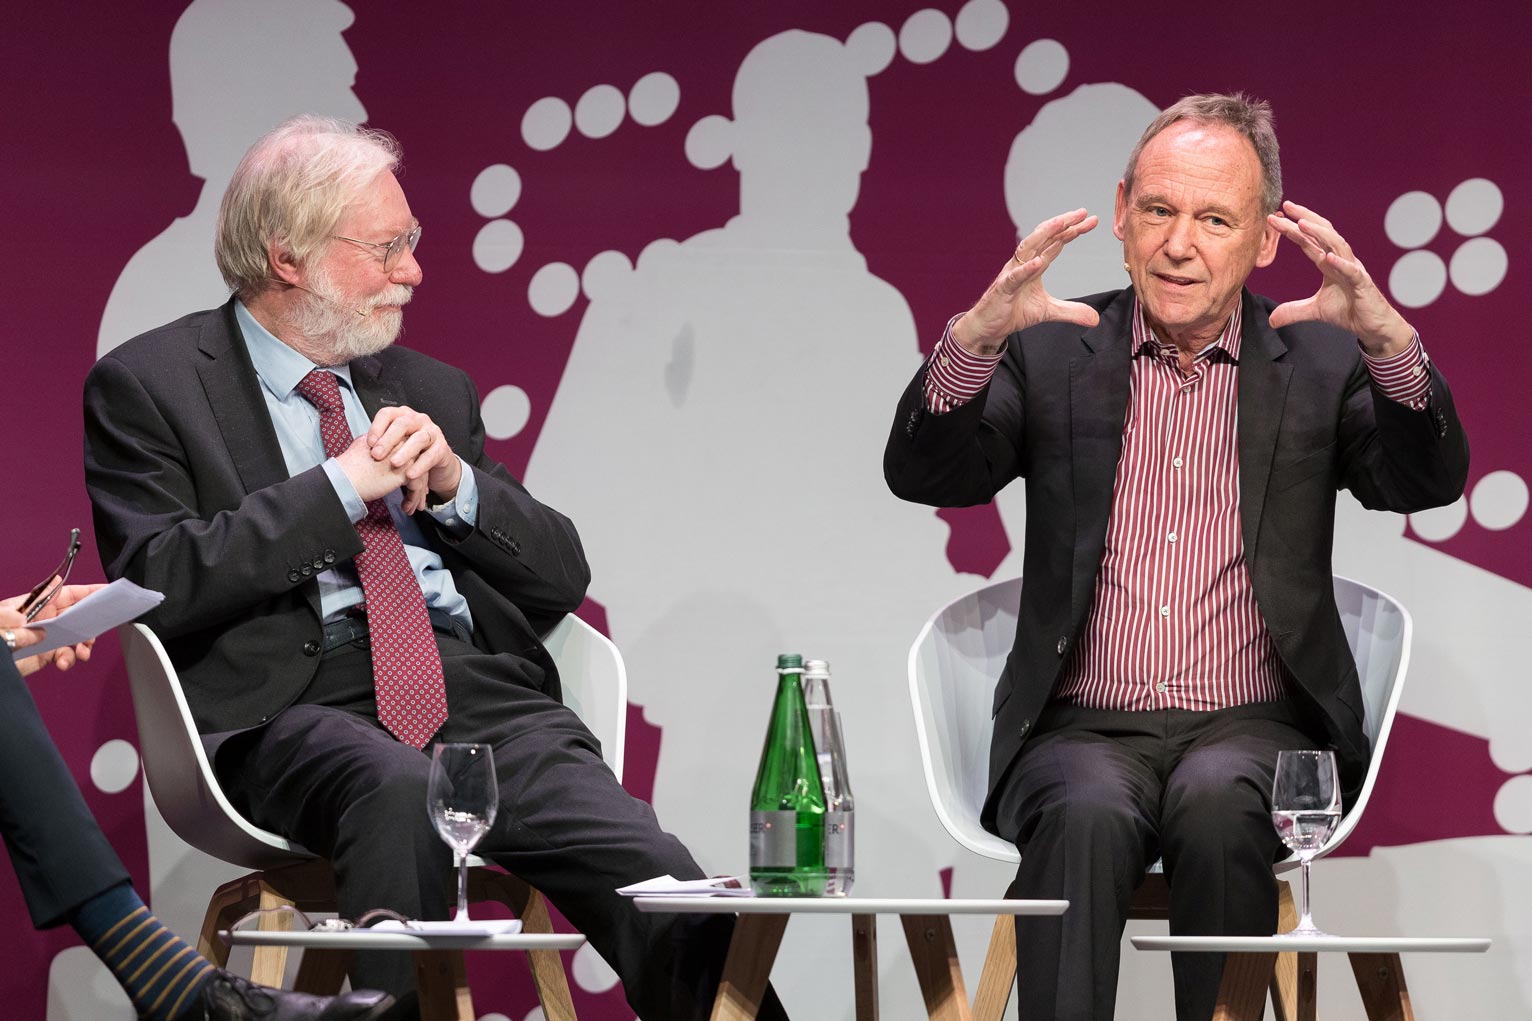 Sir Paul Collier and journalist Alan Posener discussed the cultural foundations for a prosperous society.